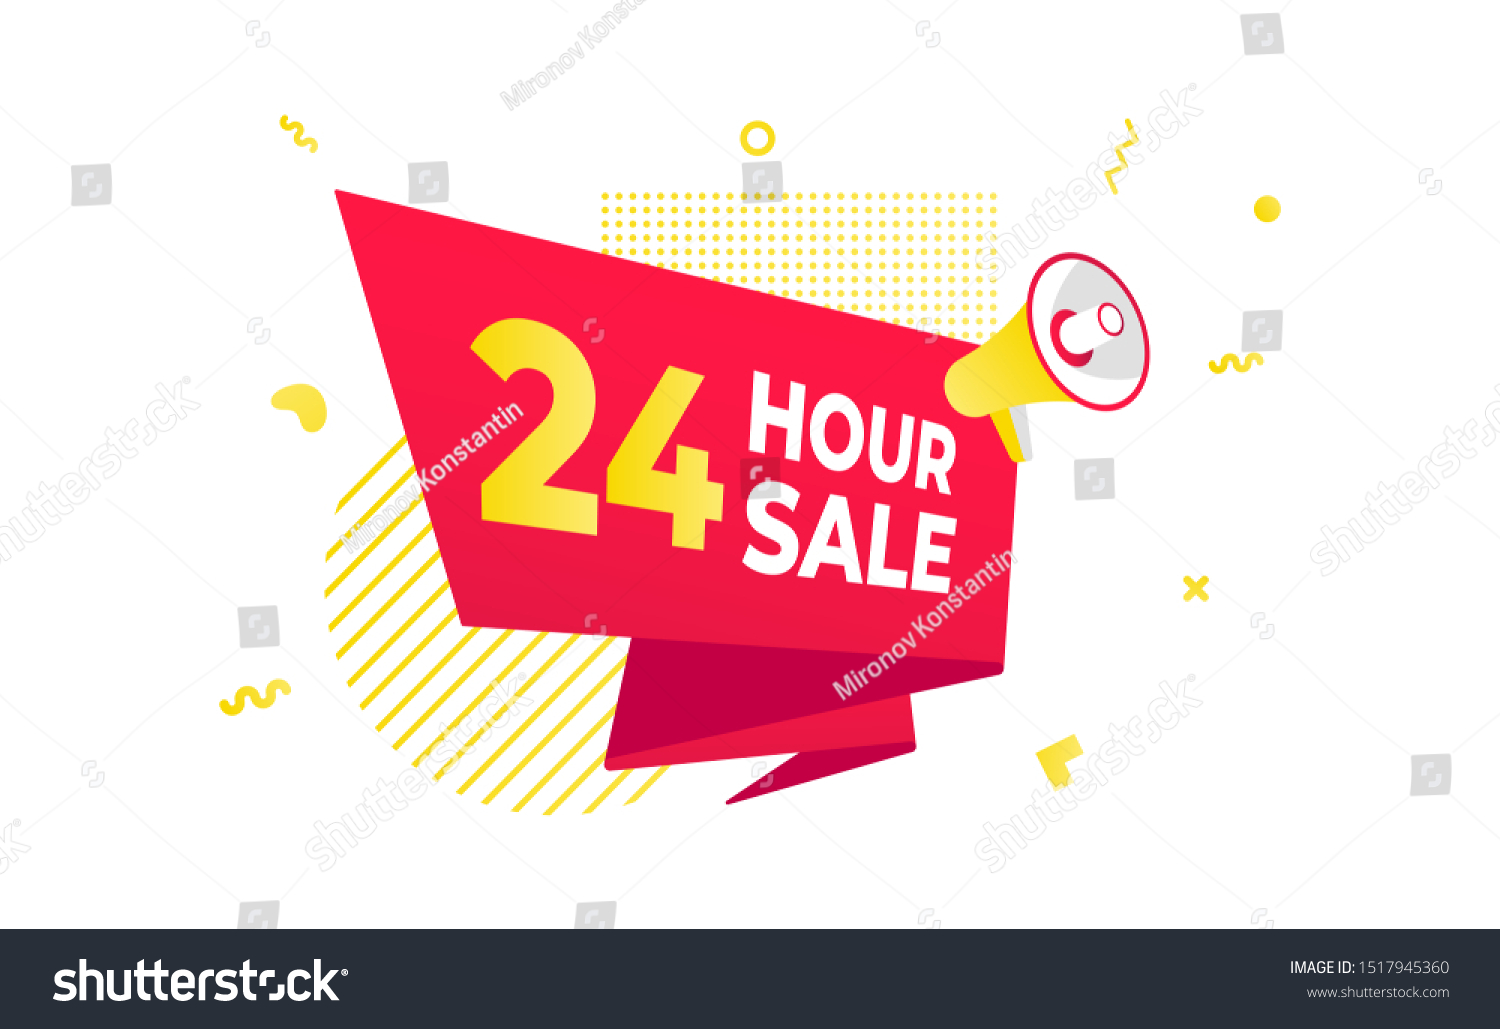 SVG of 24 hour sale countdown ribbon badge icon sign with big red ribbon, megaphone and abstract elements behind isolated on white background. svg